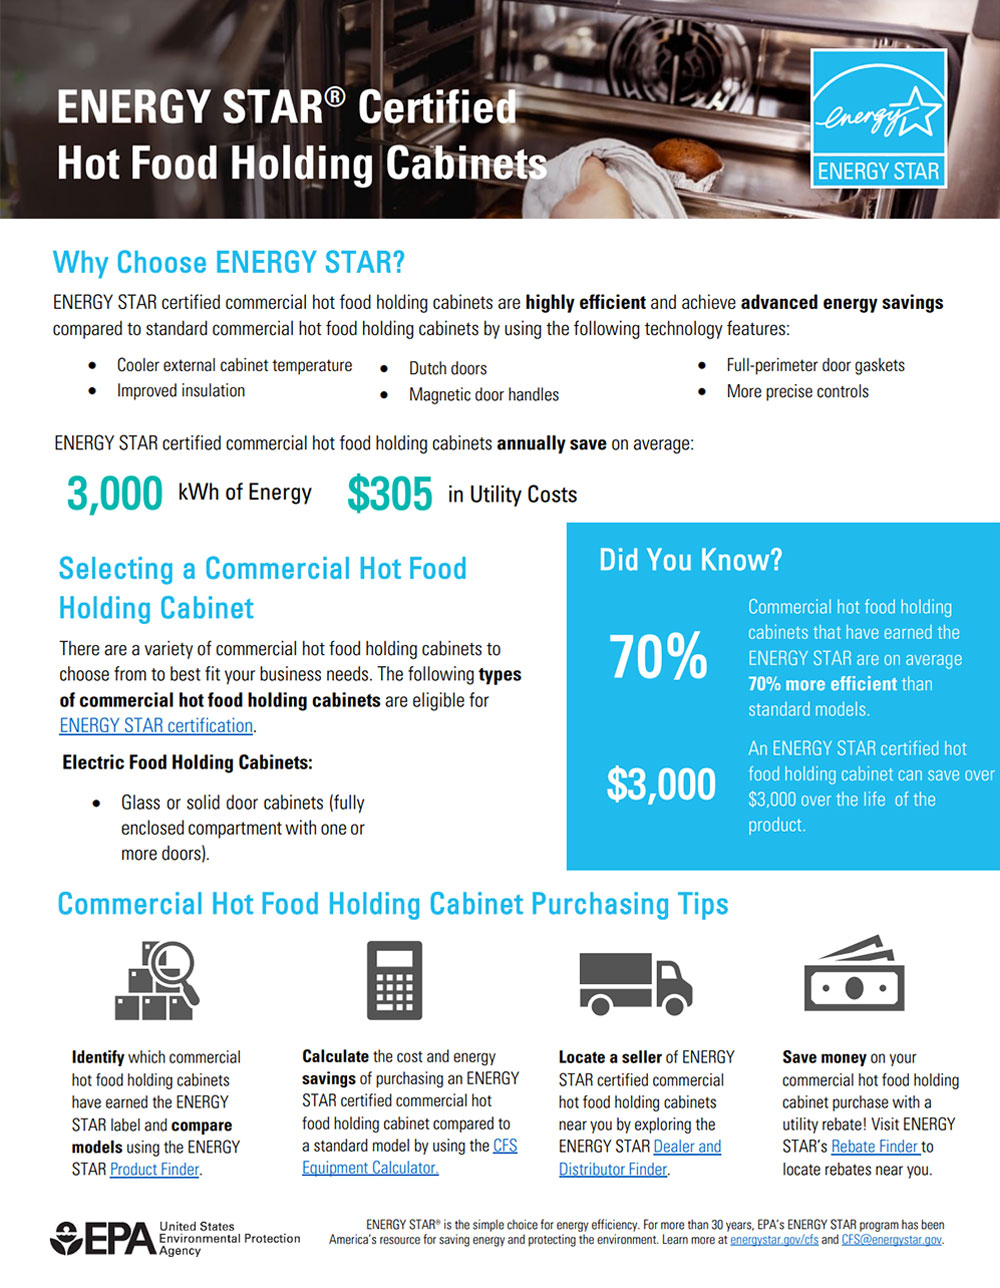 ENERGY STAR® Certified Hot Food Holding Cabinets